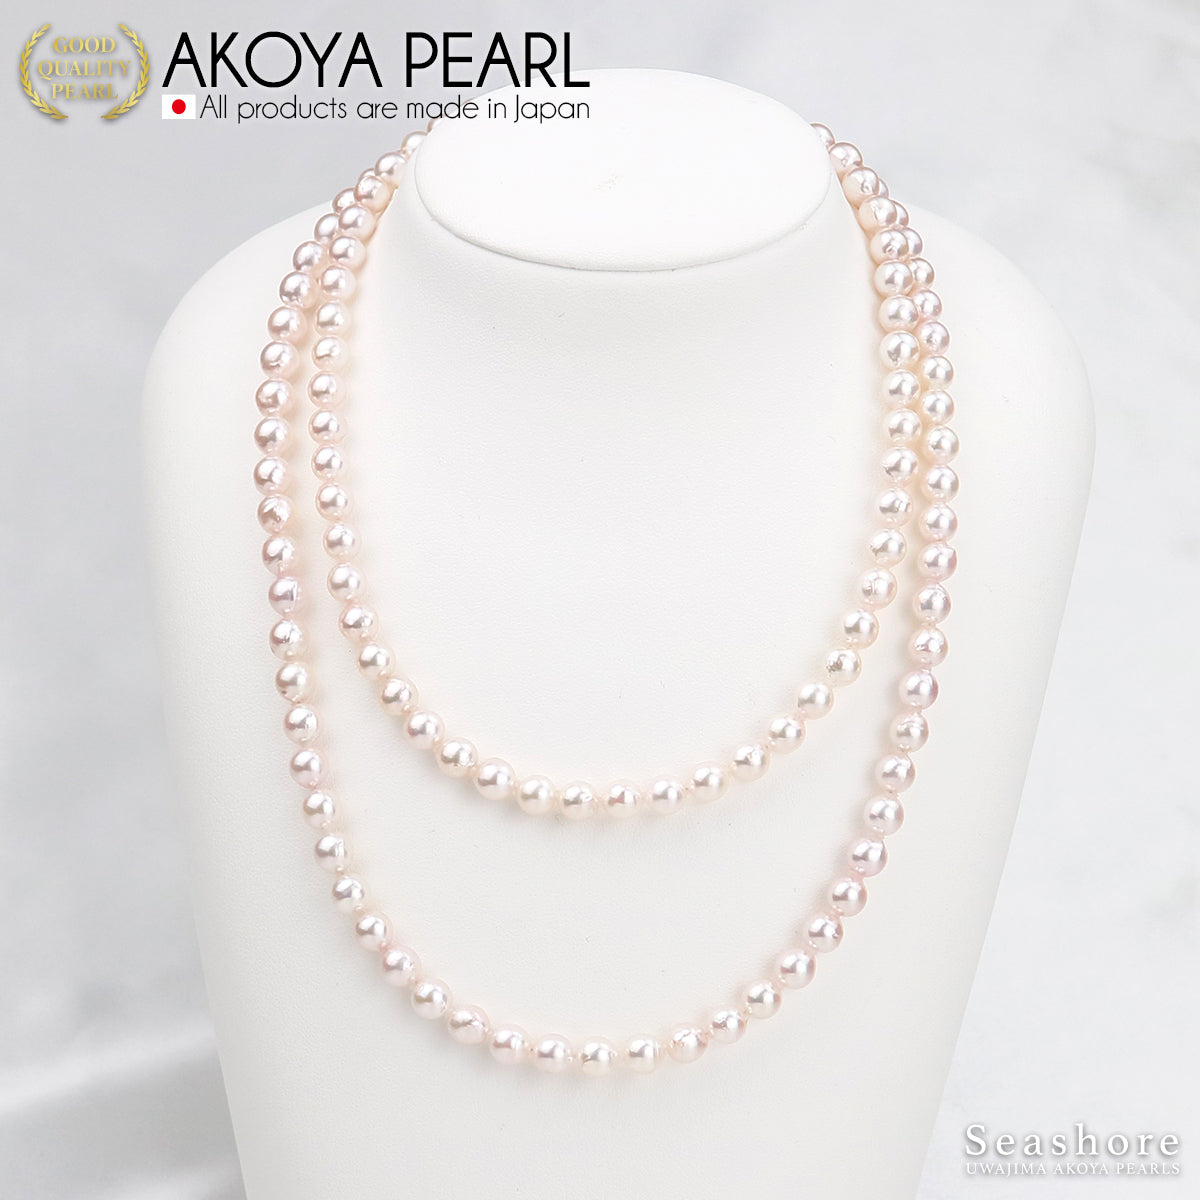 Akoya Pearl Long Pearl Necklace 80cm 85cm Semi-Baroque [6.5-7.0mm] White Certificate of Authenticity Cardboard Case Included (4090)